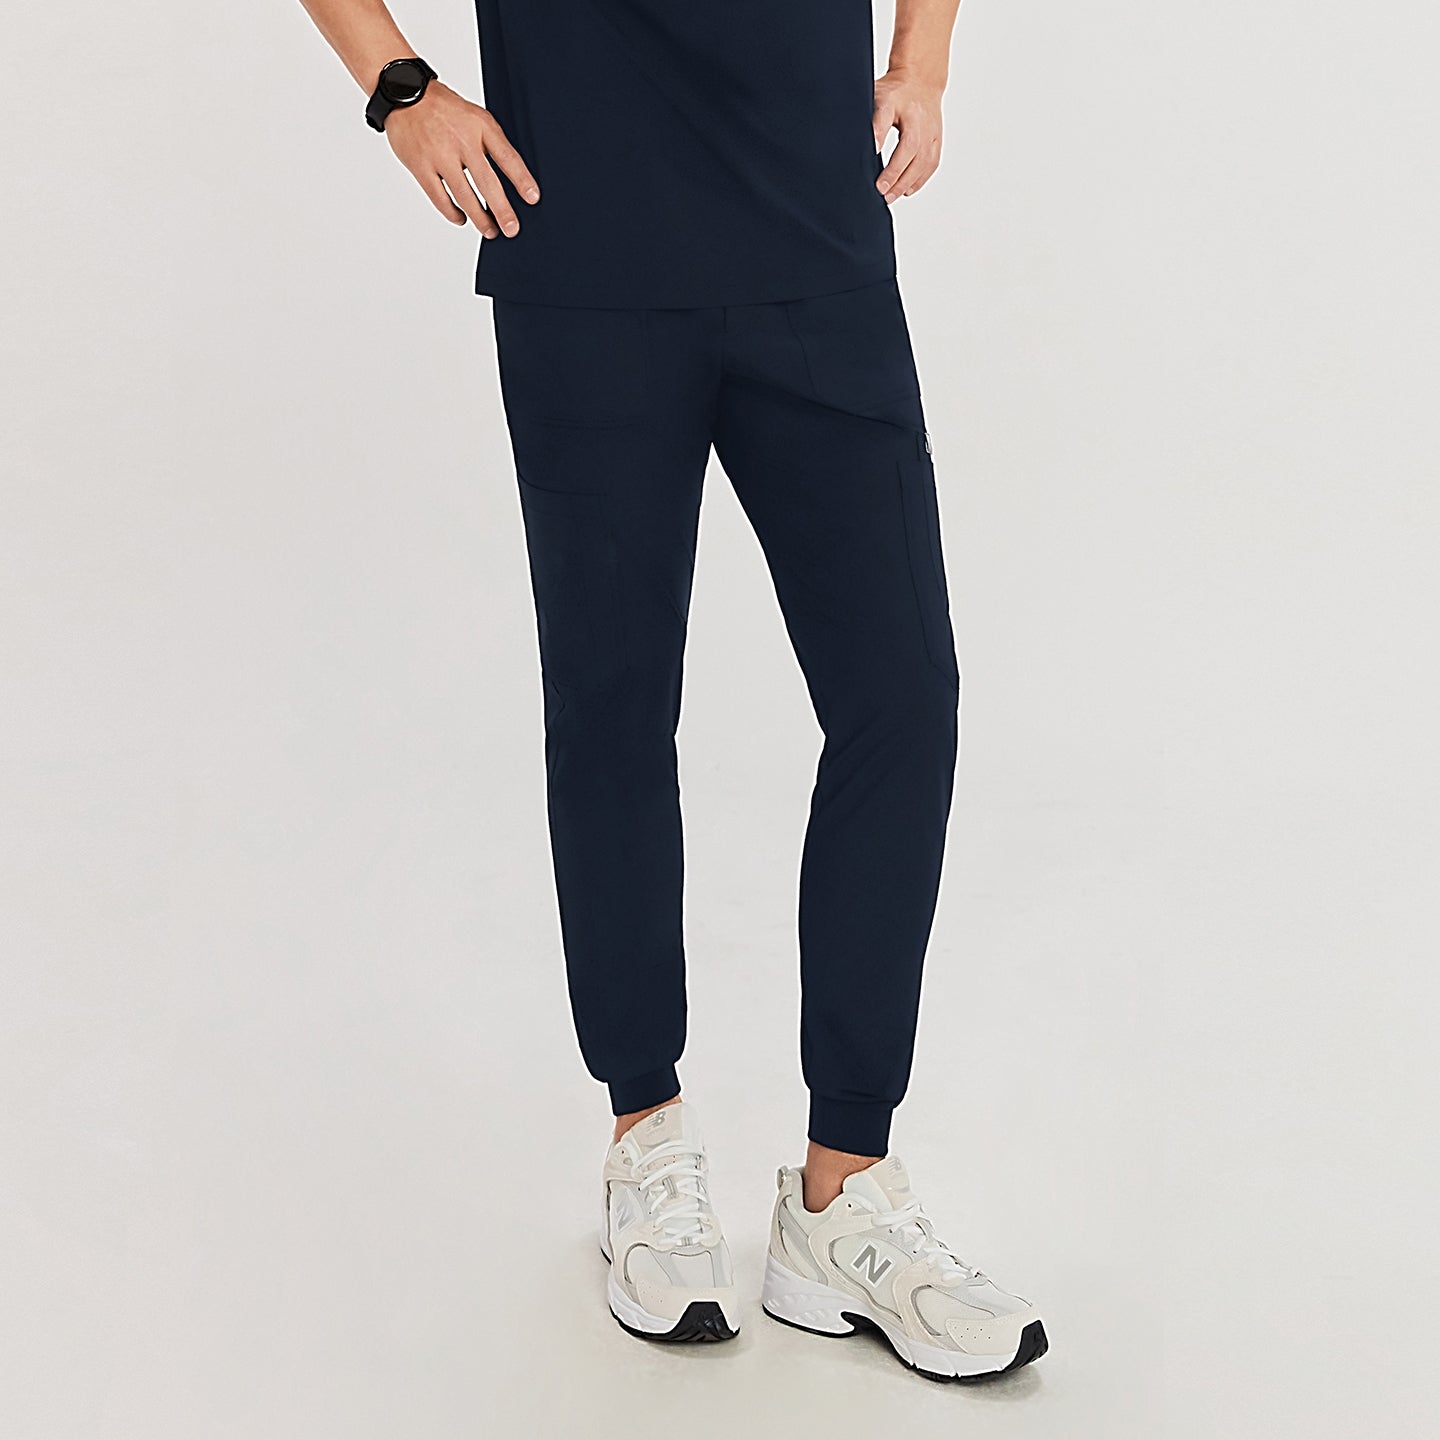 Close-up view of jogger-style scrub pants with elastic cuffs, showing a front pocket detail and white New Balance sneakers,Navy